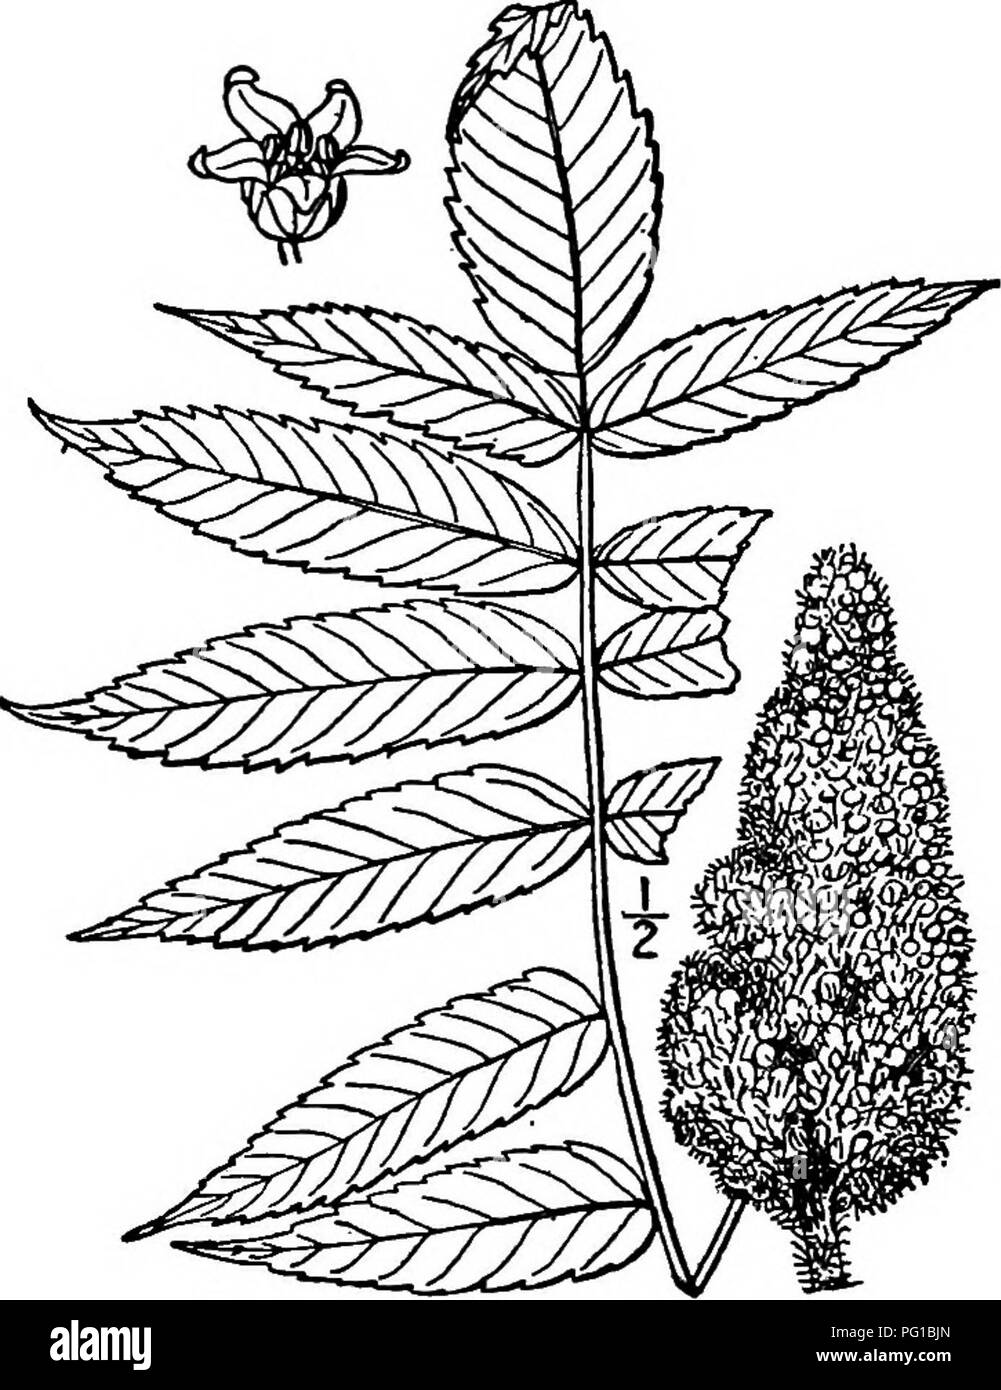 . North American trees : being descriptions and illustrations of the trees growing independently of cultivation in North America, north of Mexico and the West Indies . Trees. 6o8 The Sumacs about 3 mm. long. The leaves are from 2 to 6 dm. long, with 11 to 31 leaflets and a romid hairy stalk and axis; the leaflets are very short-stalked or stalk- less, lanceolate to oblong-lanceolate, 7 to 12 cm. long, long-pointed, sharply toothed, firm, dark green and nearly smooth on the upper surface when fully grown, pale and somewhat hairy, at least on the veins, on the imder side. The tree flowers in Jun Stock Photo